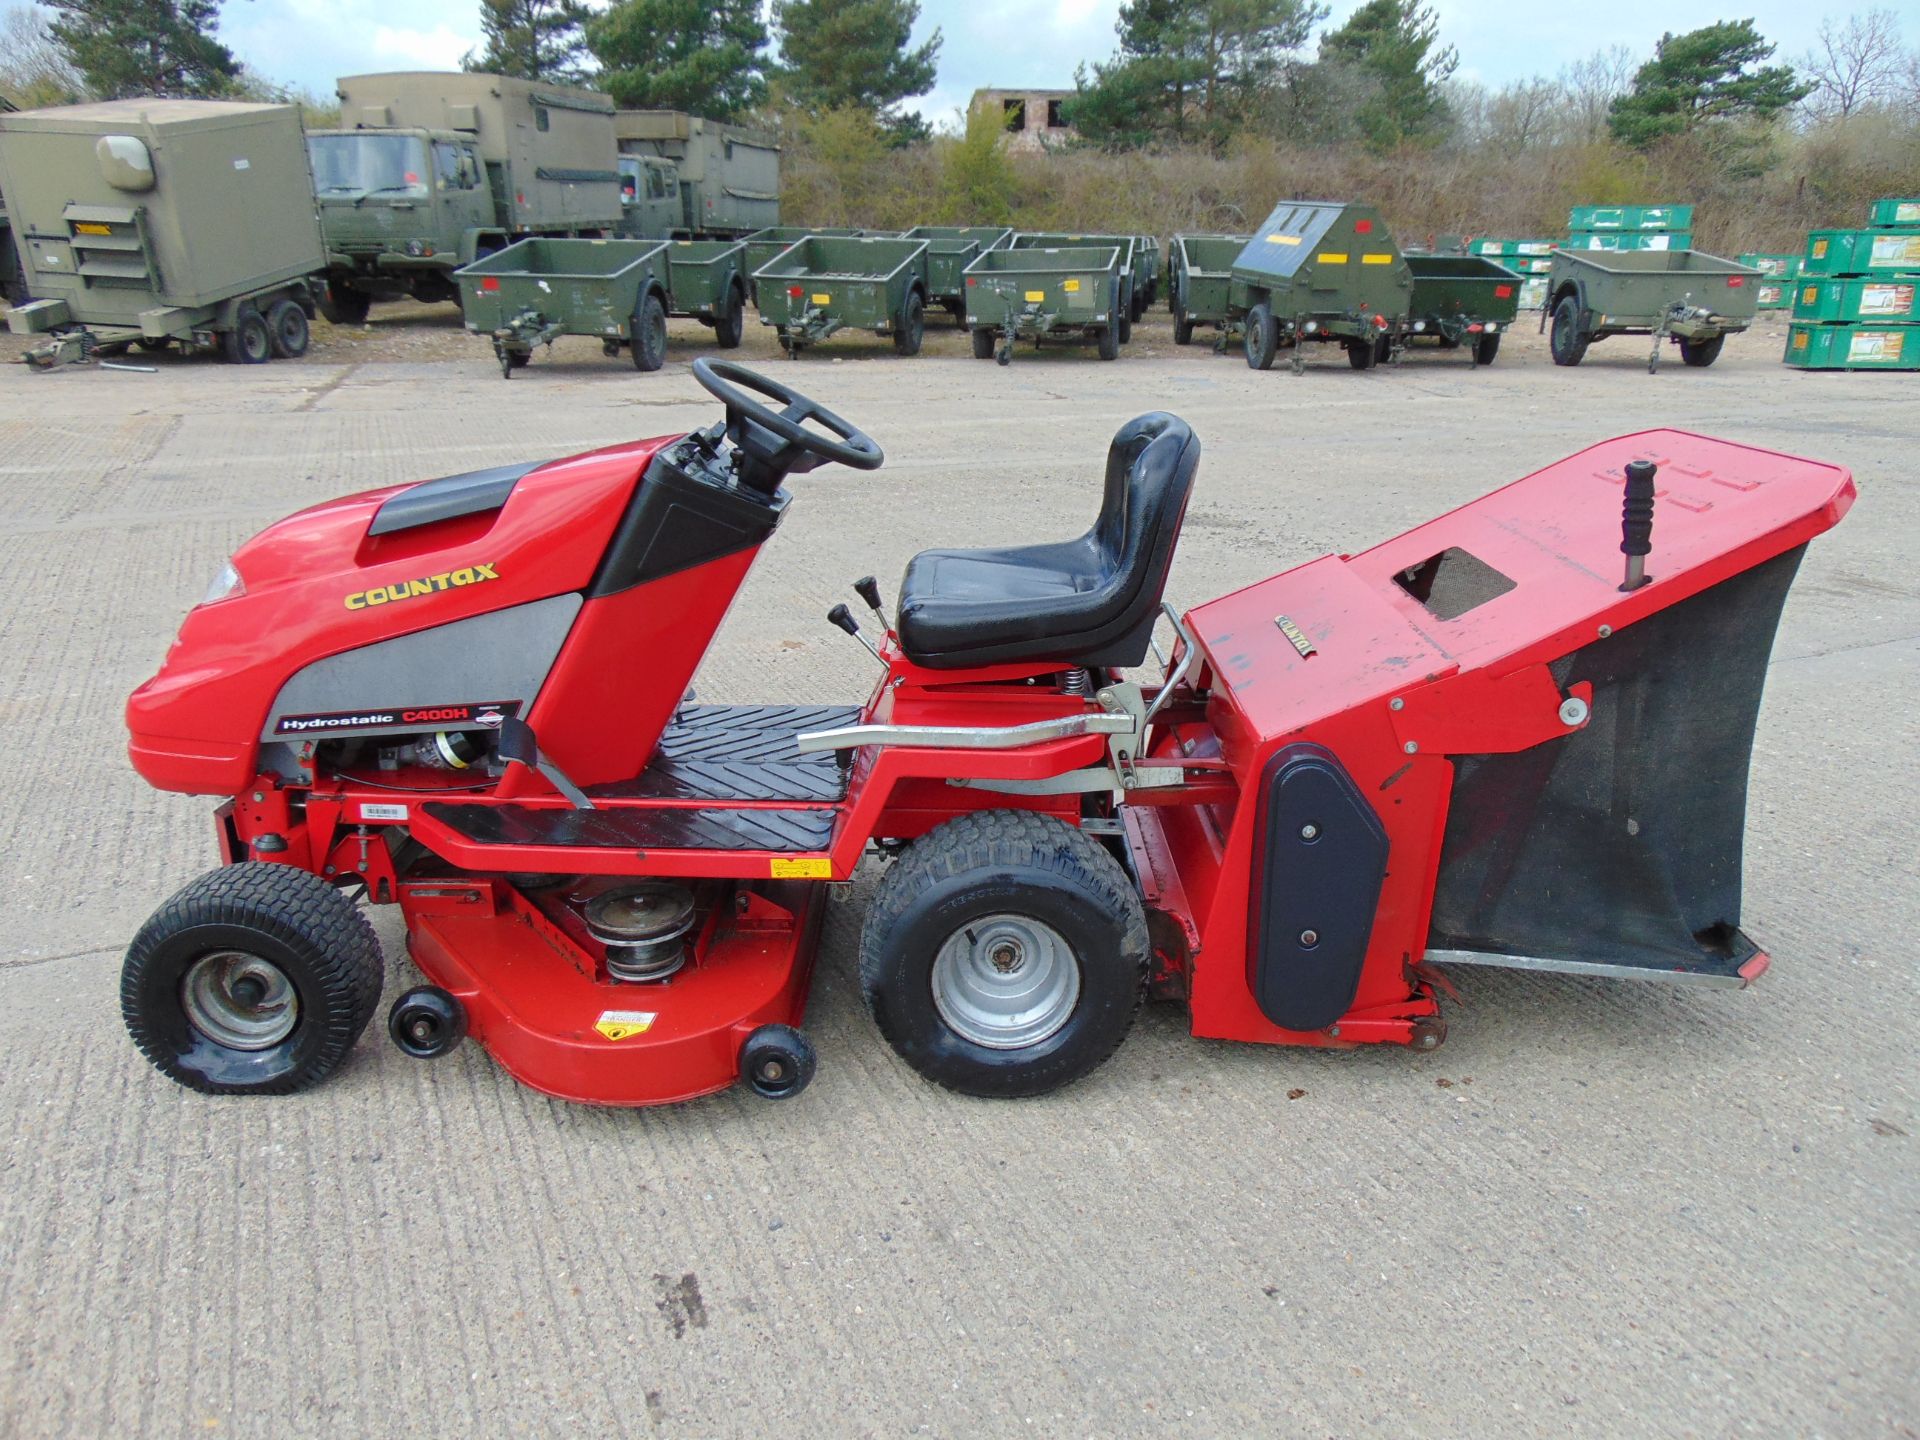 Countax C400H Ride On Mower / Lawn Tractor - Image 4 of 13